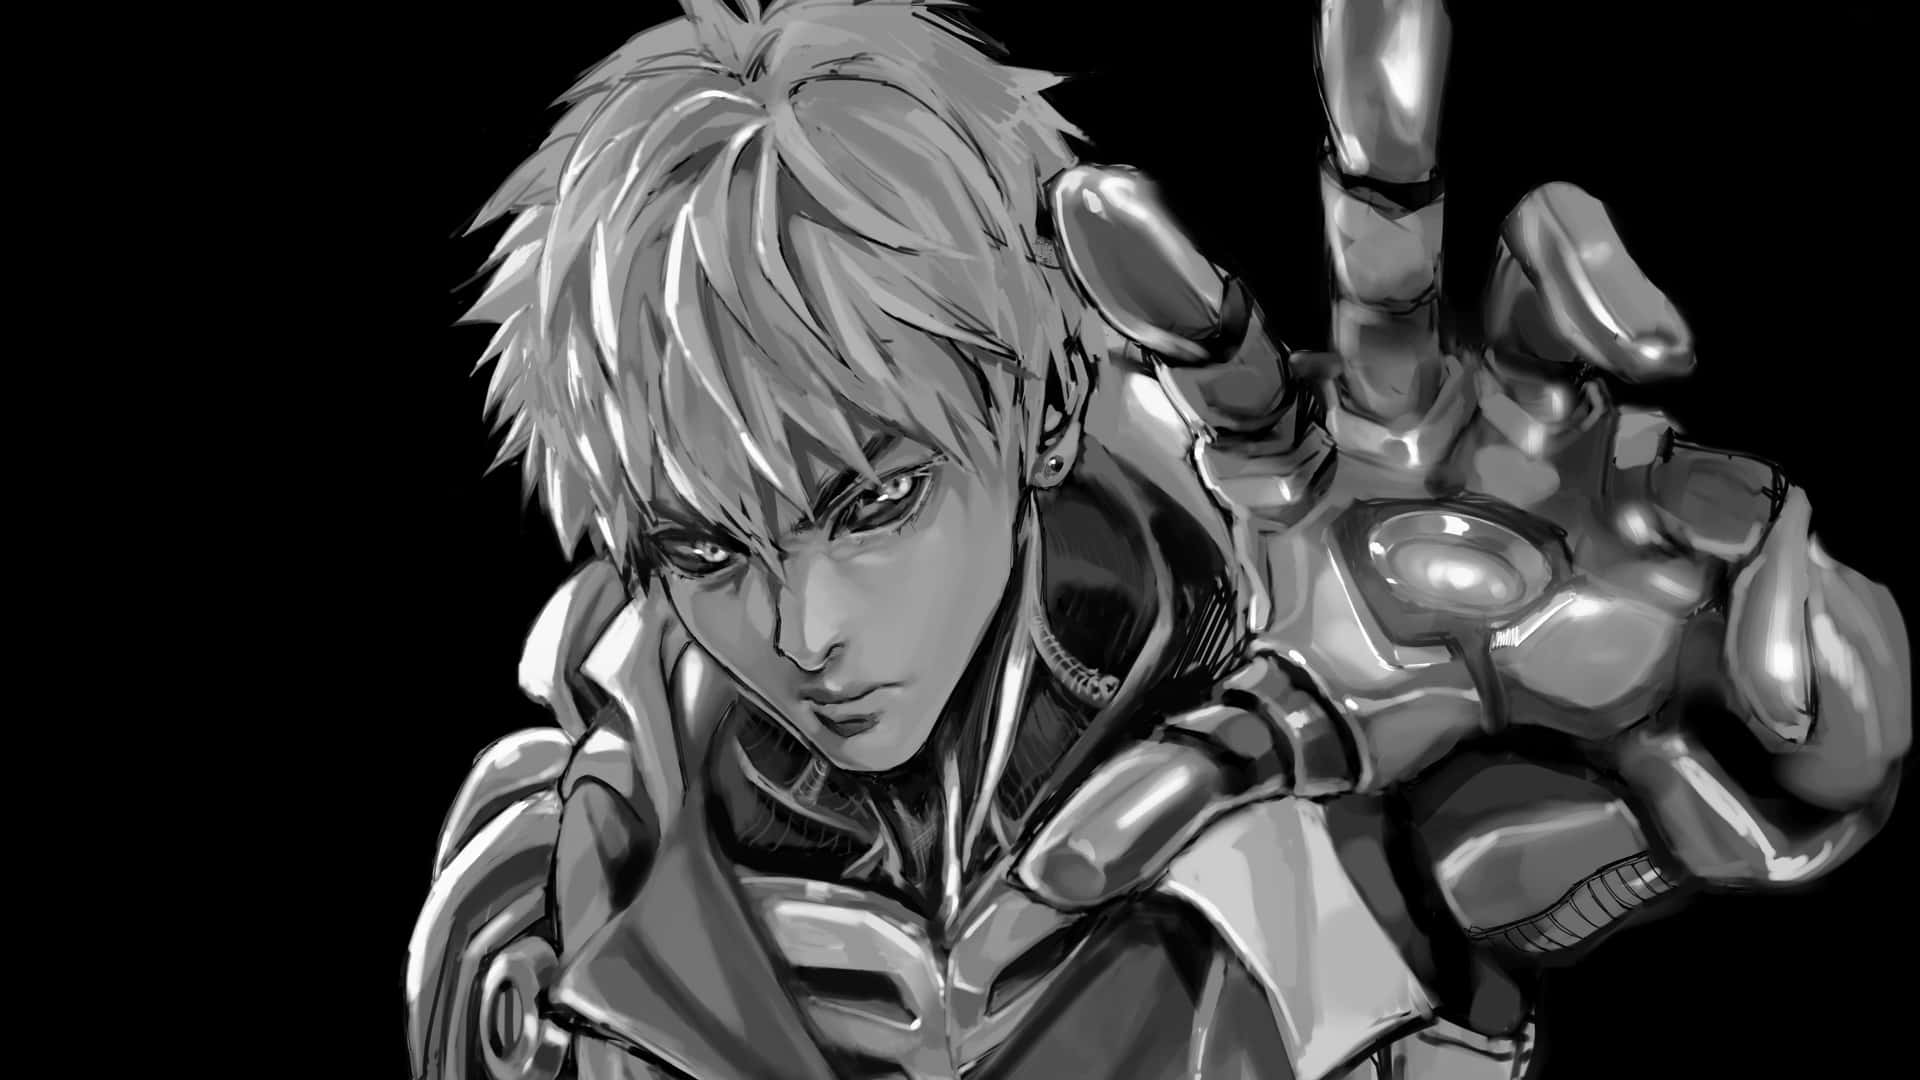 Genos, the powerful S-class Cyborg hero in action Wallpaper